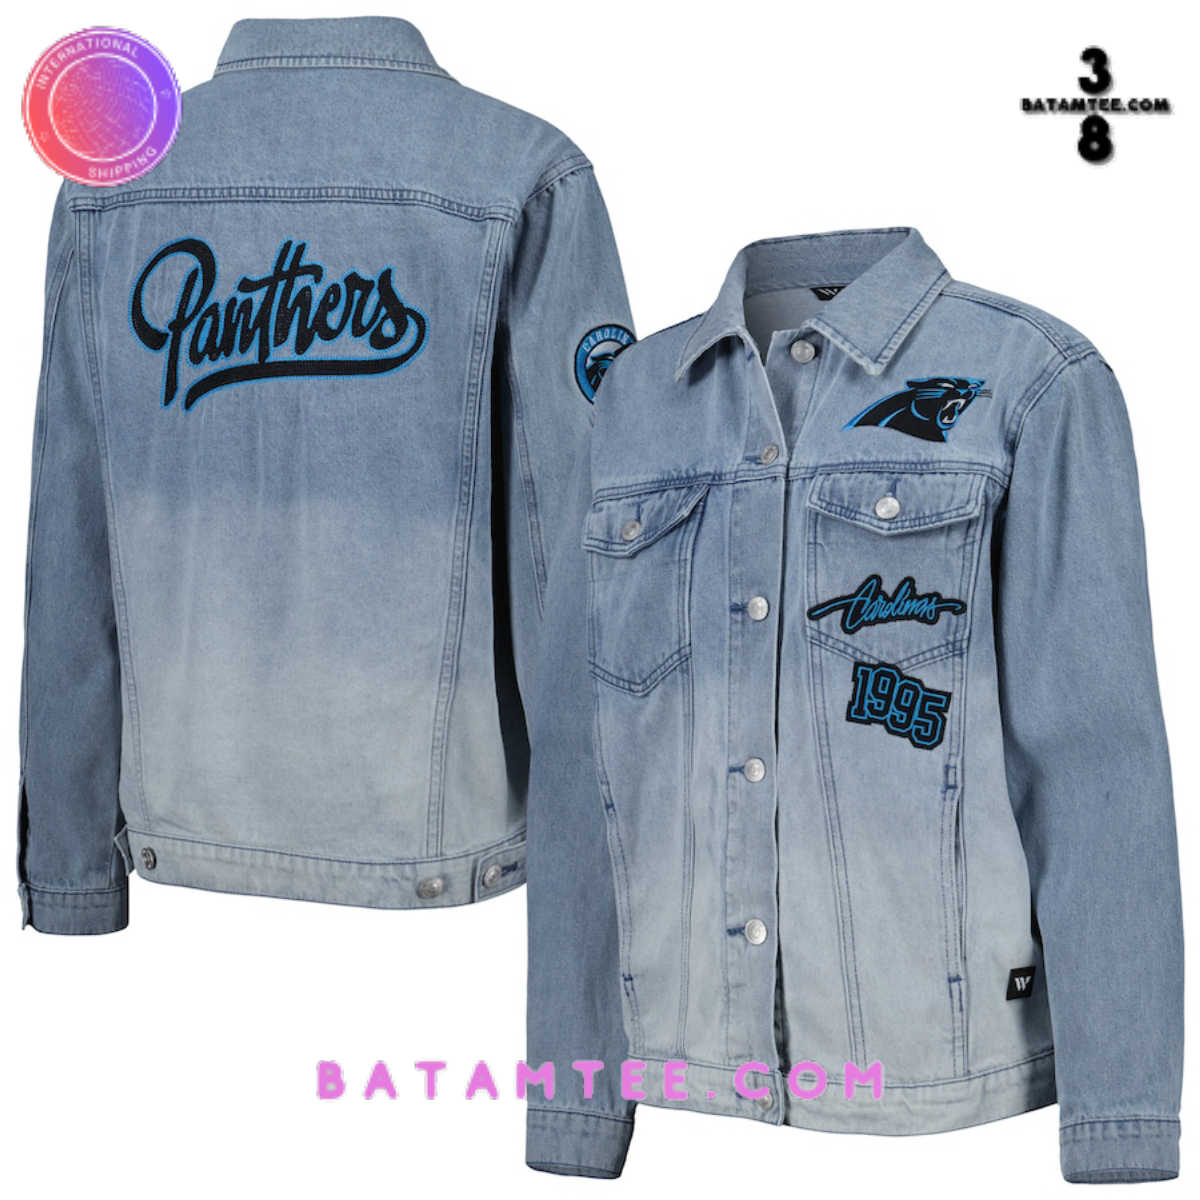 Carolina Panthers The Wild Collective 1995 Faded Button-Up Denim Jacket's Overview - Batamtee Shop - Threads & Totes: Your Style Destination